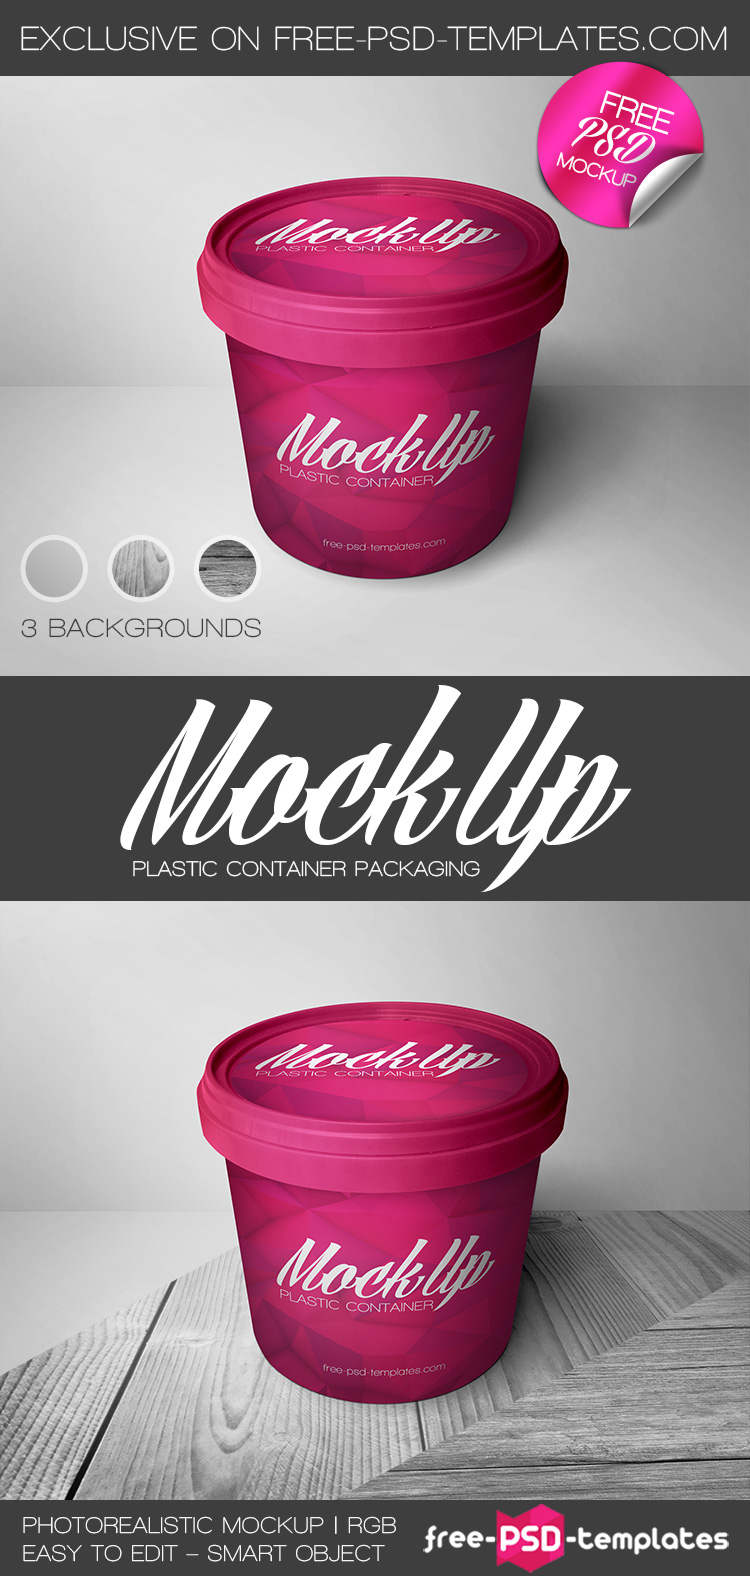 Download Free Plastic Container Packaging Mock-up in PSD | Free PSD ...